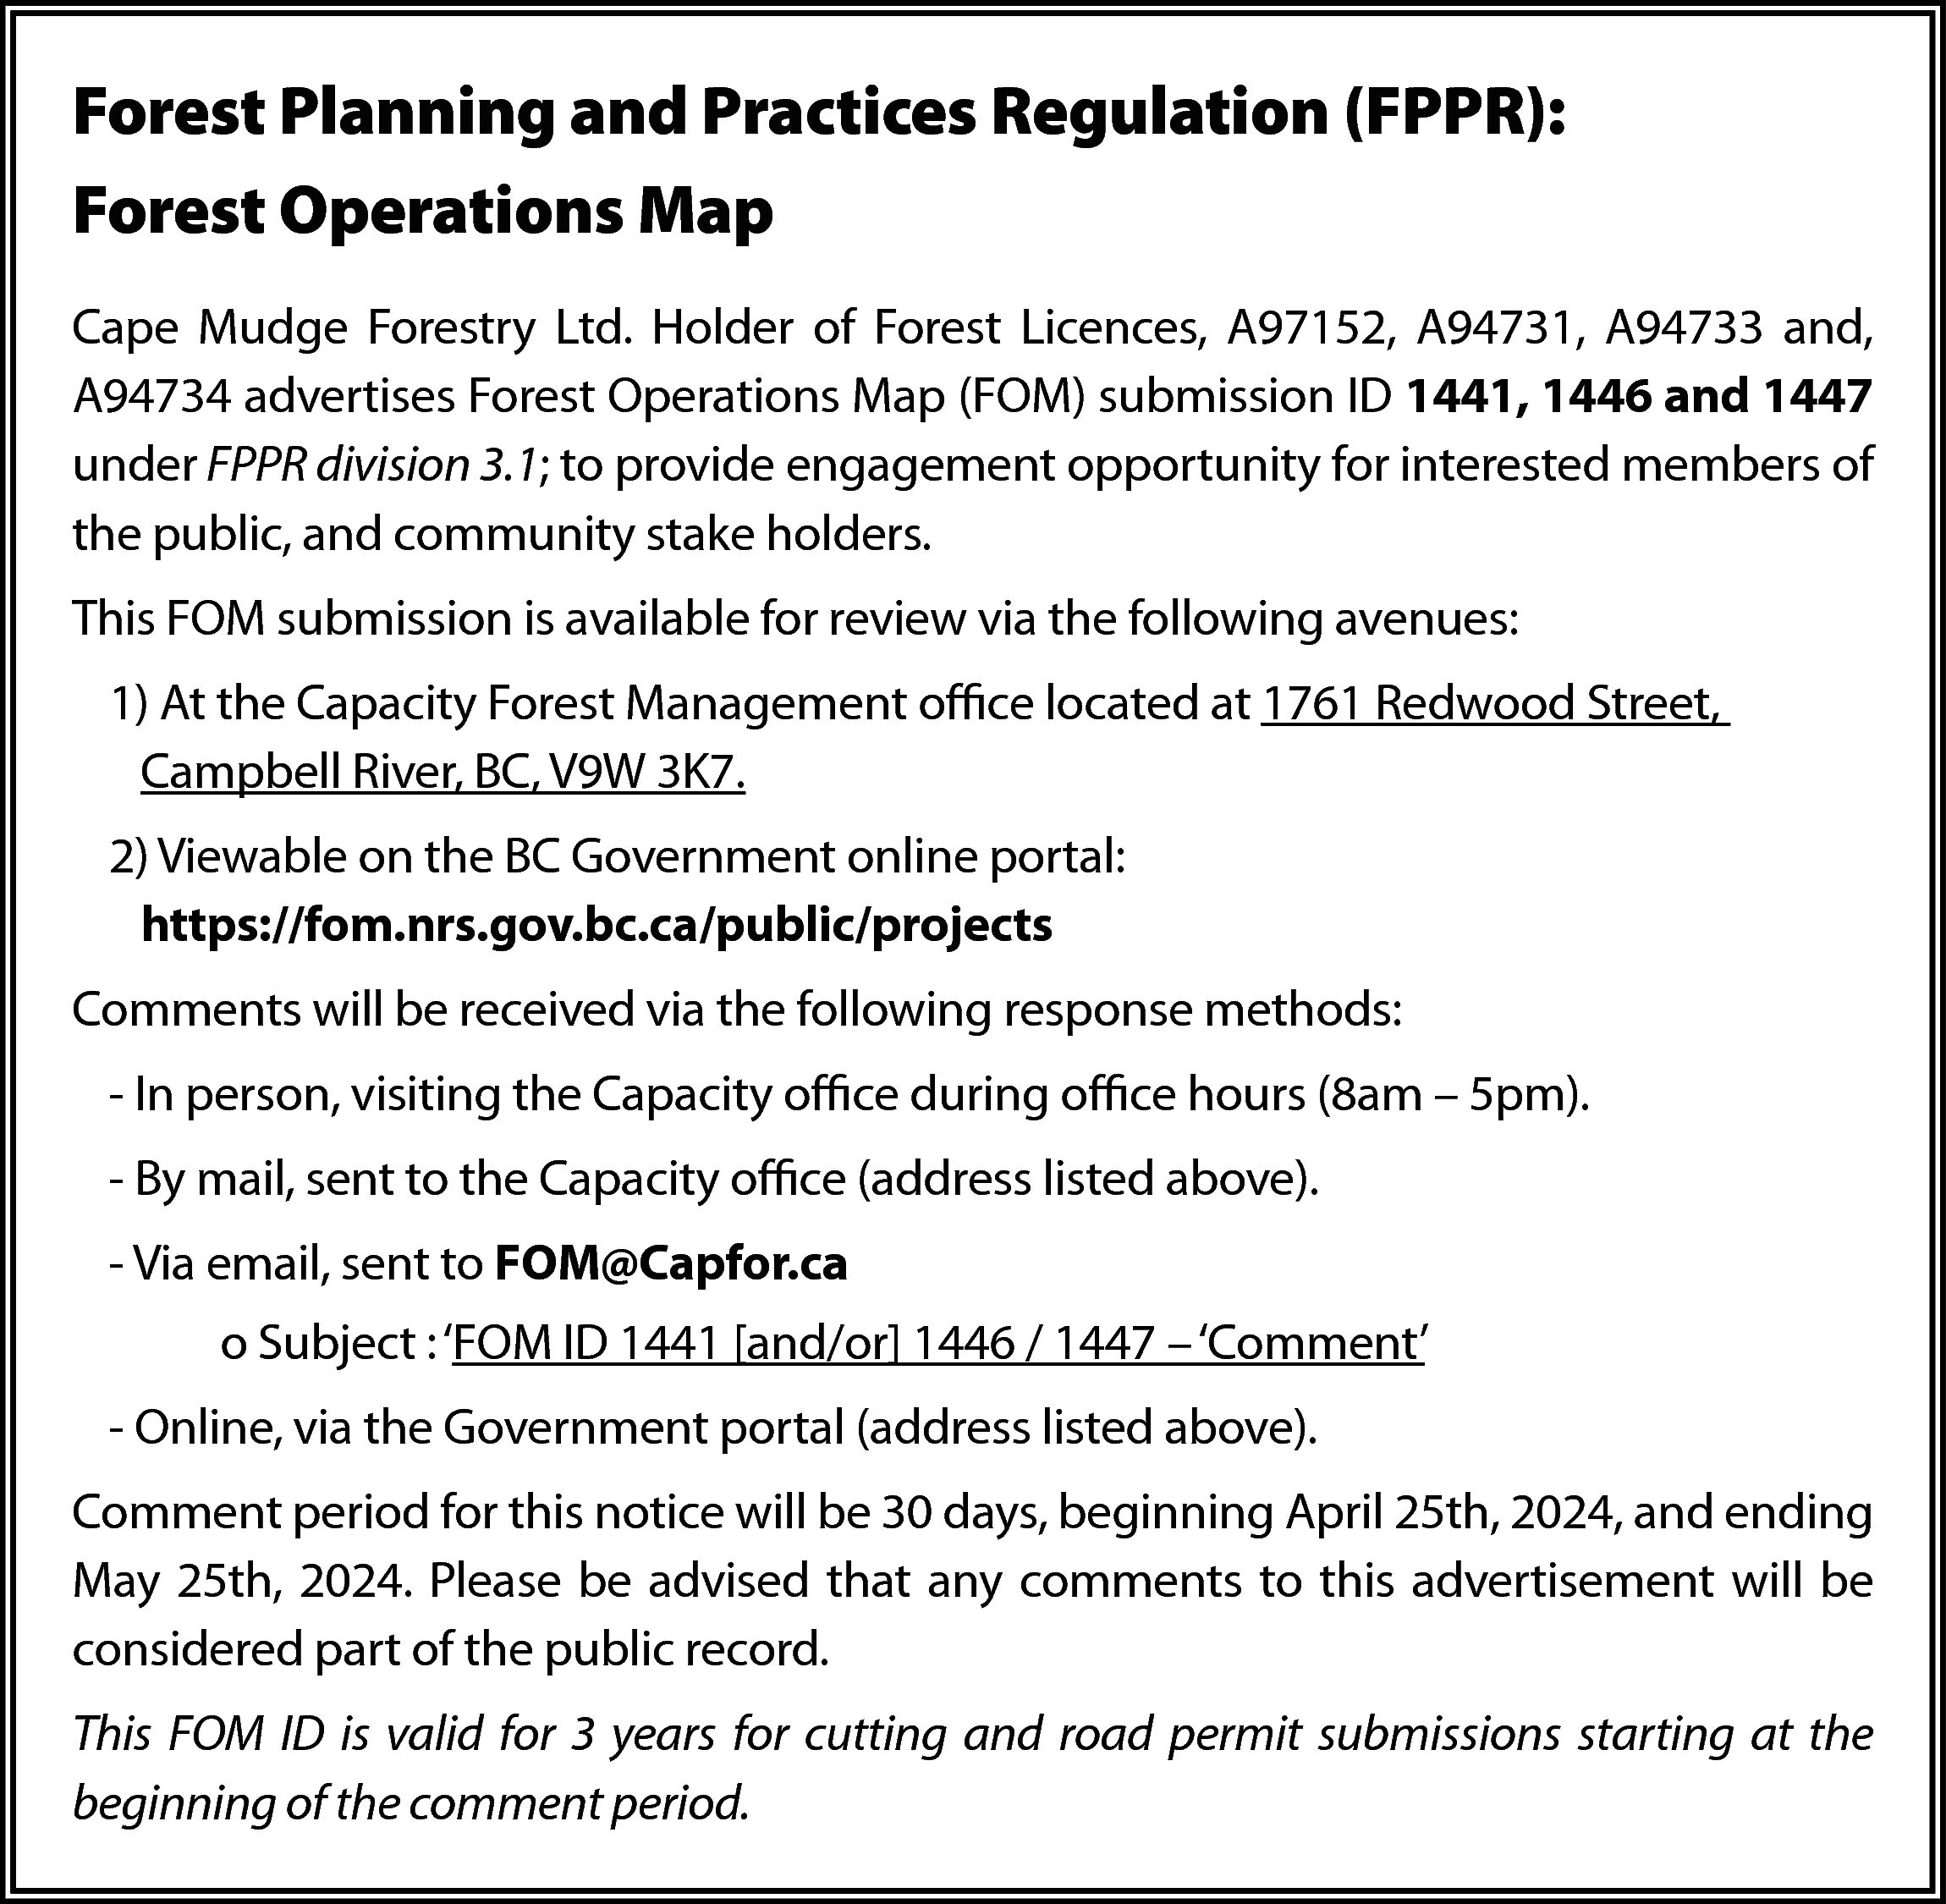 Forest Planning and Practices Regulation  Forest Planning and Practices Regulation (FPPR):  Forest Operations Map  Cape Mudge Forestry Ltd. Holder of Forest Licences, A97152, A94731, A94733 and,  A94734 advertises Forest Operations Map (FOM) submission ID 1441, 1446 and 1447  under FPPR division 3.1; to provide engagement opportunity for interested members of  the public, and community stake holders.  This FOM submission is available for review via the following avenues:  1) At the Capacity Forest Management office located at 1761 Redwood Street,  Campbell River, BC, V9W 3K7.  2) Viewable on the BC Government online portal:  https://fom.nrs.gov.bc.ca/public/projects  Comments will be received via the following response methods:  - In person, visiting the Capacity office during office hours (8am – 5pm).  - By mail, sent to the Capacity office (address listed above).  - Via email, sent to FOM@Capfor.ca  o Subject : ‘FOM ID 1441 [and/or] 1446 / 1447 – ‘Comment’  - Online, via the Government portal (address listed above).  Comment period for this notice will be 30 days, beginning April 25th, 2024, and ending  May 25th, 2024. Please be advised that any comments to this advertisement will be  considered part of the public record.  This FOM ID is valid for 3 years for cutting and road permit submissions starting at the  beginning of the comment period.    